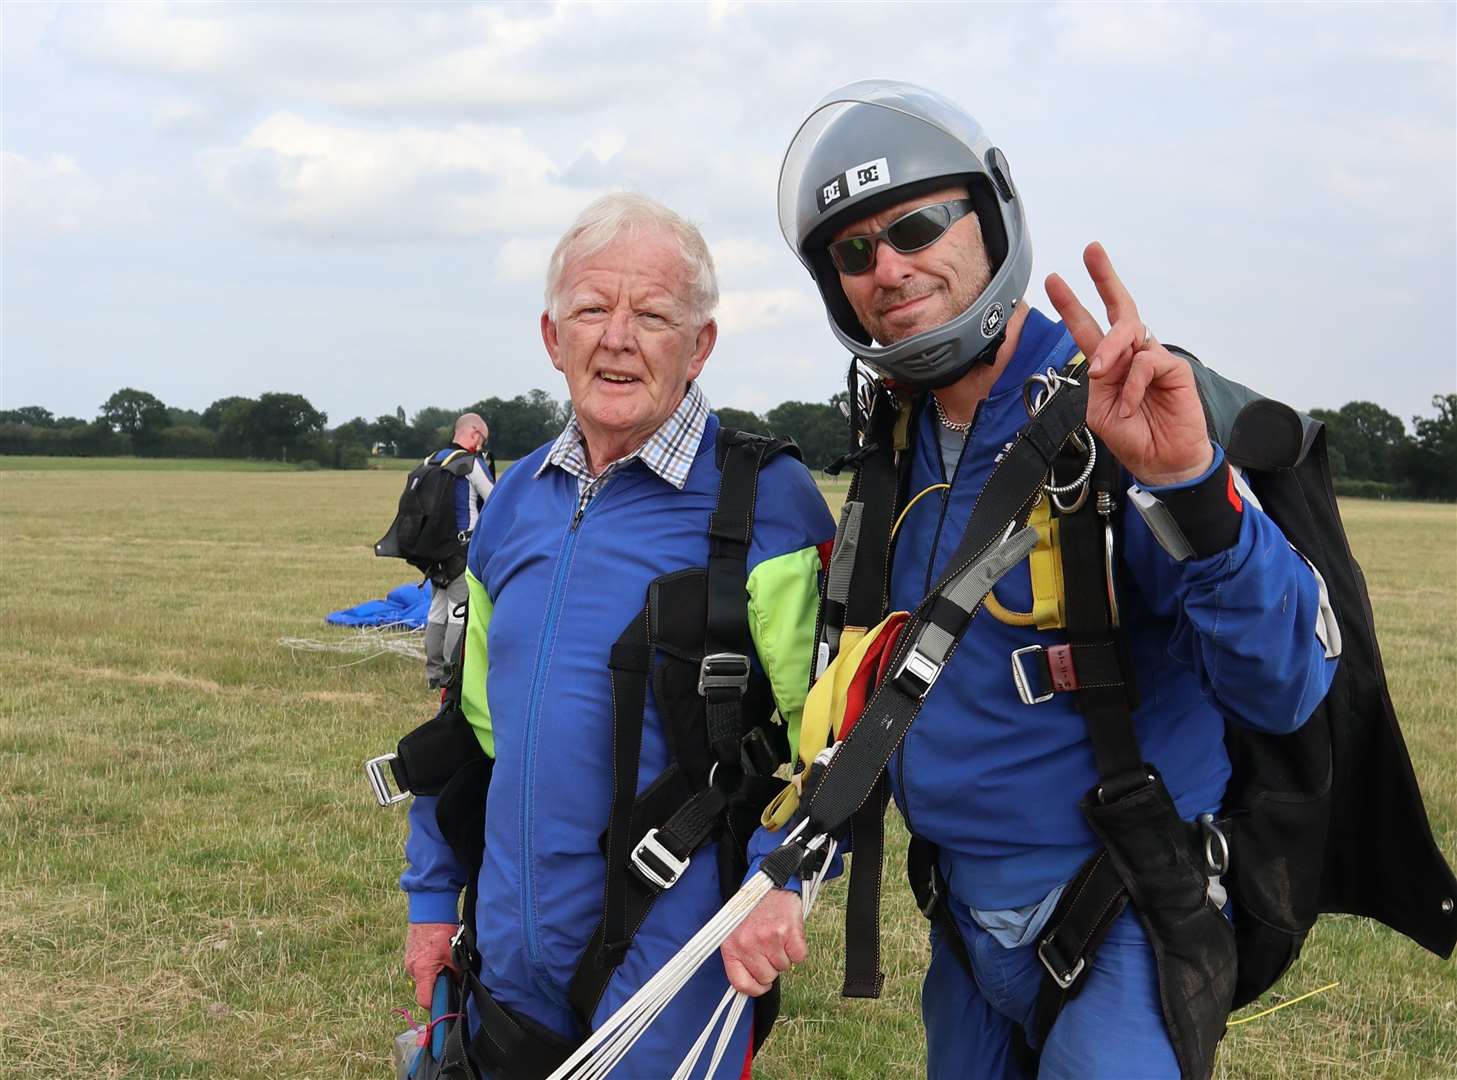 Chris Pinn with his instructor before they set off on the skydive (13879955)